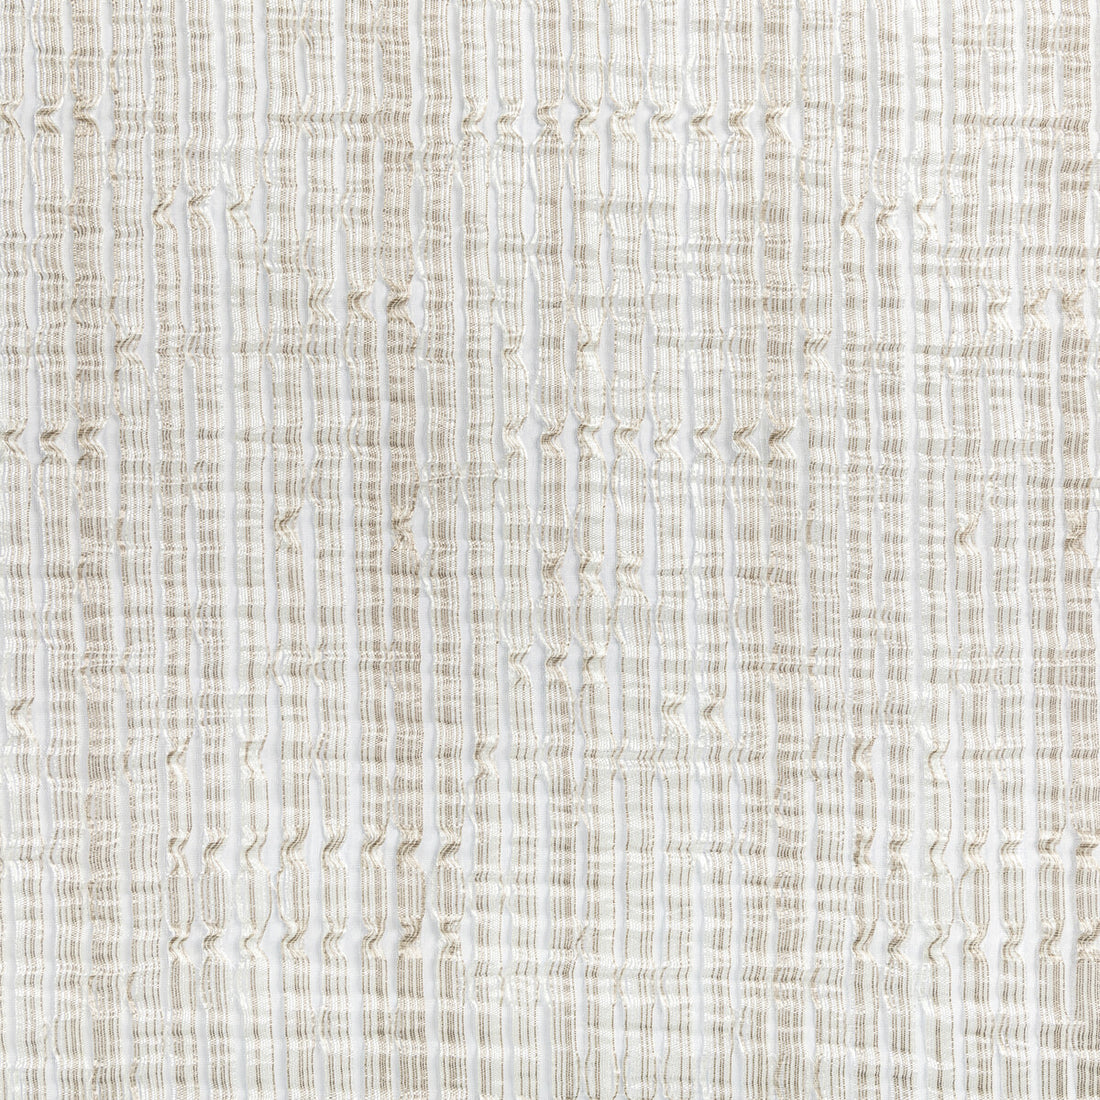 Kravet Contract fabric in 4531-16 color - pattern 4531.16.0 - by Kravet Contract in the Sheer Outlook collection